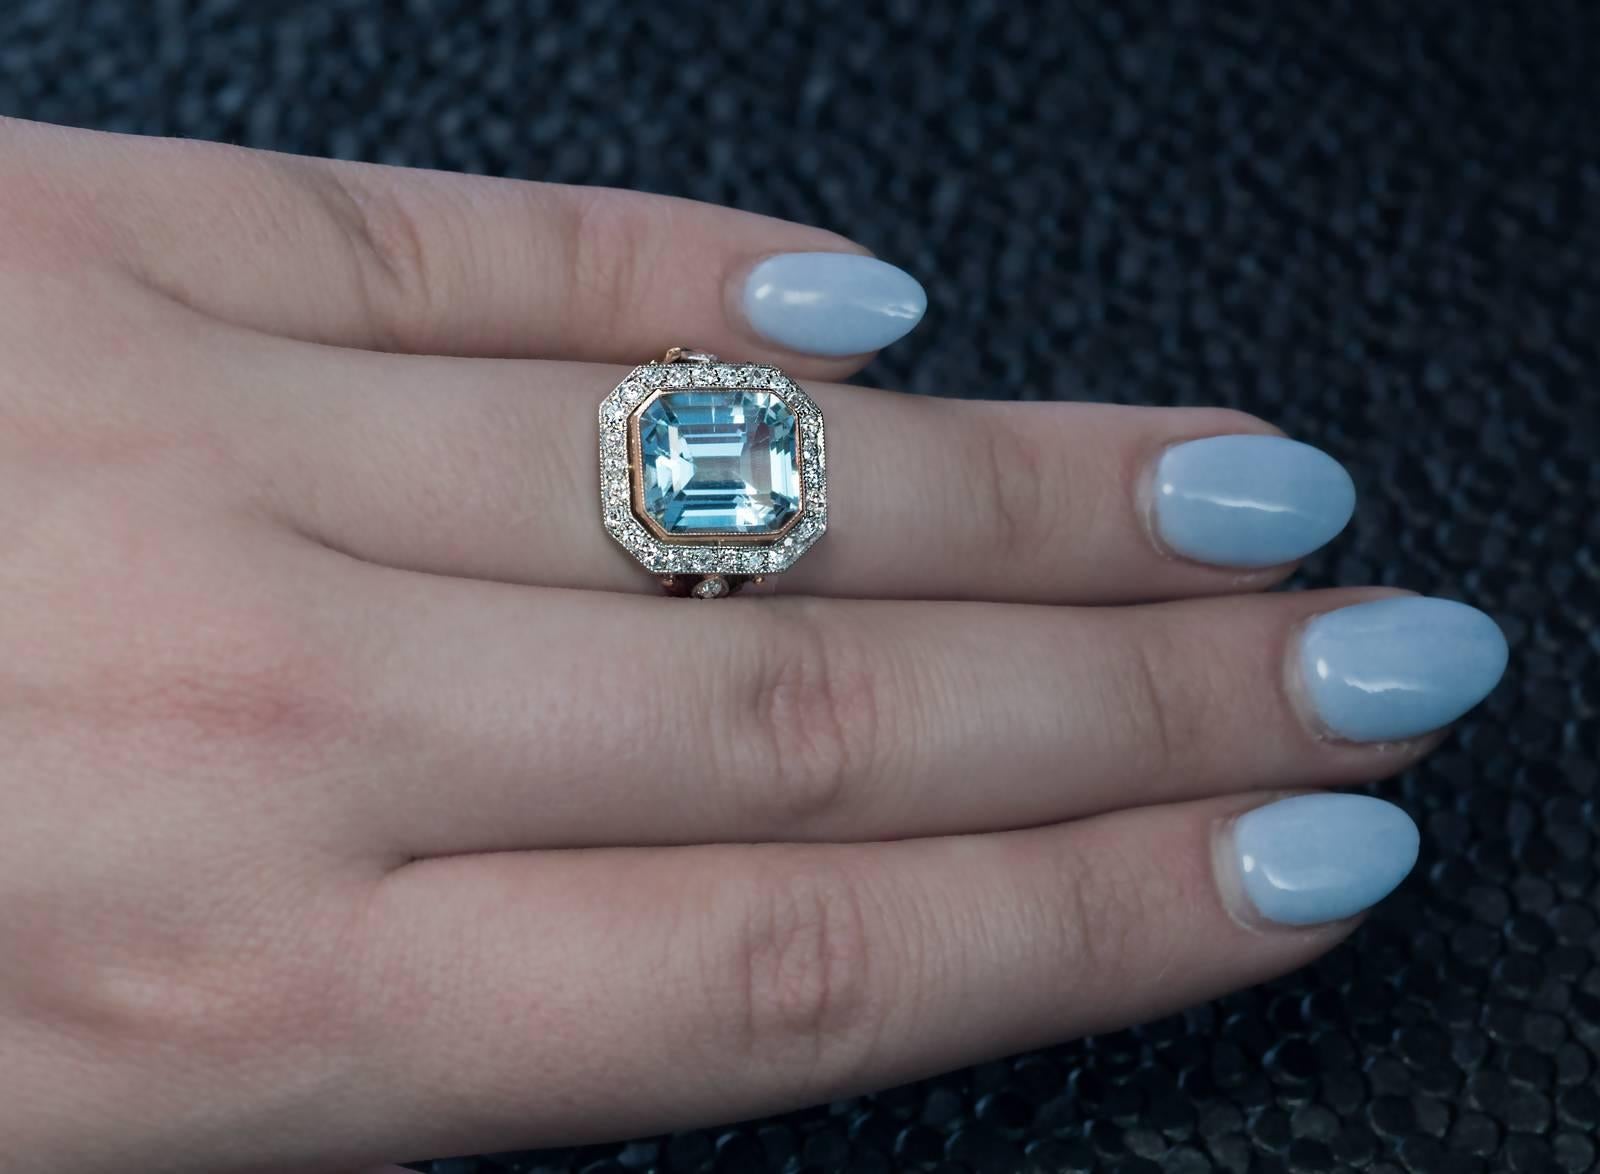 circa 1930
A 14K gold ring features an emerald cut cool blue aquamarine (measuring 11.26 x 9.80 x 6.80 mm, approximately 5.14 ct) framed by old single cut diamonds set in silver over gold and flanked by fleur-de-lis motif shoulders embellished with